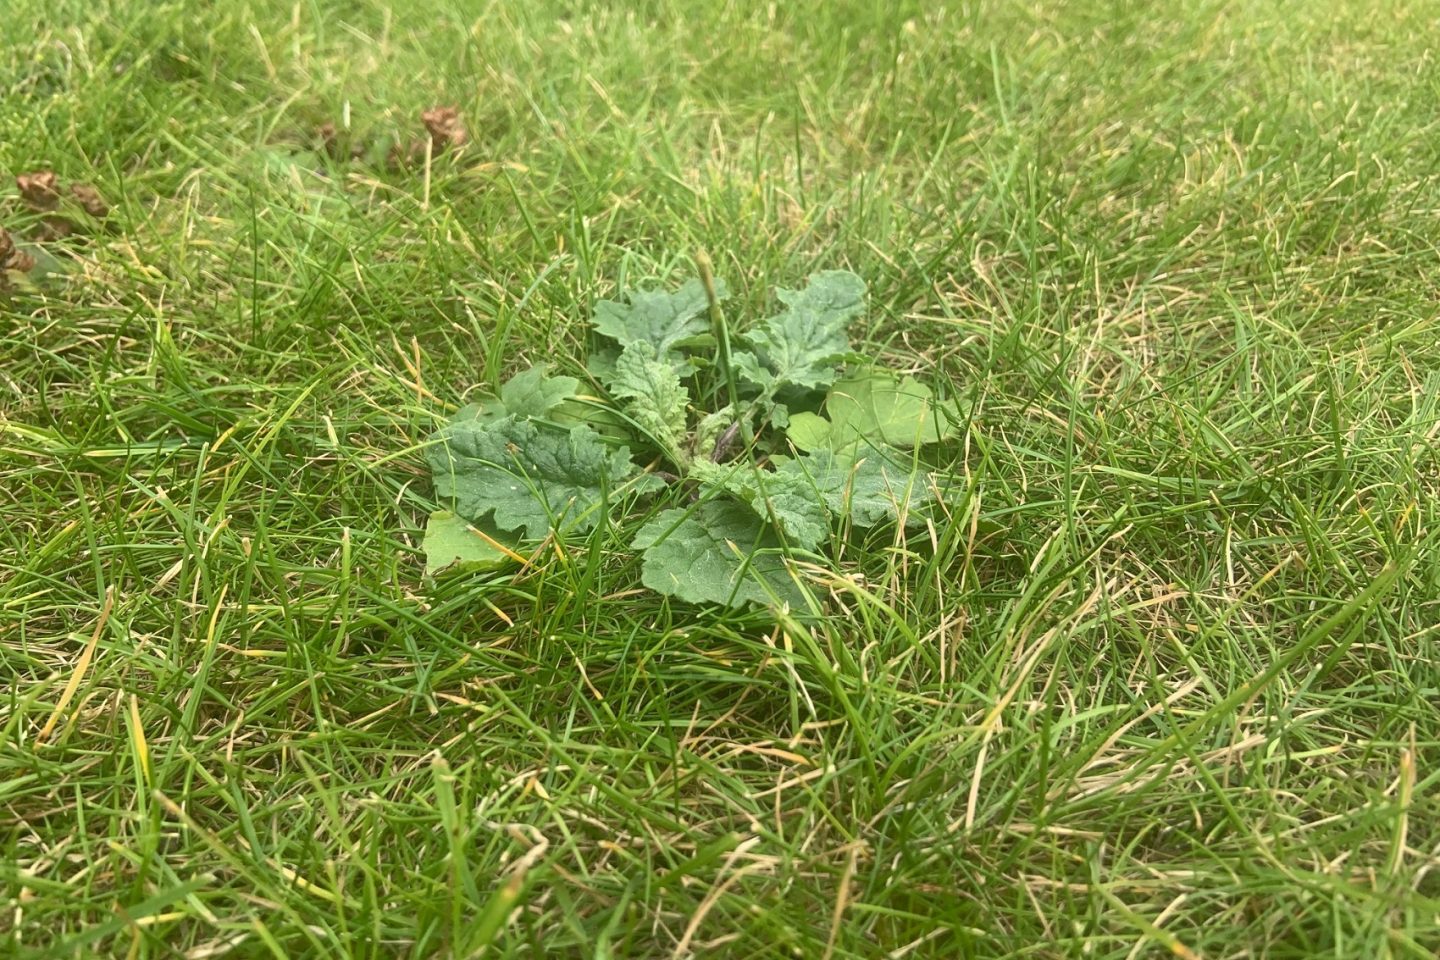 A potential weed growing in a grass lawn